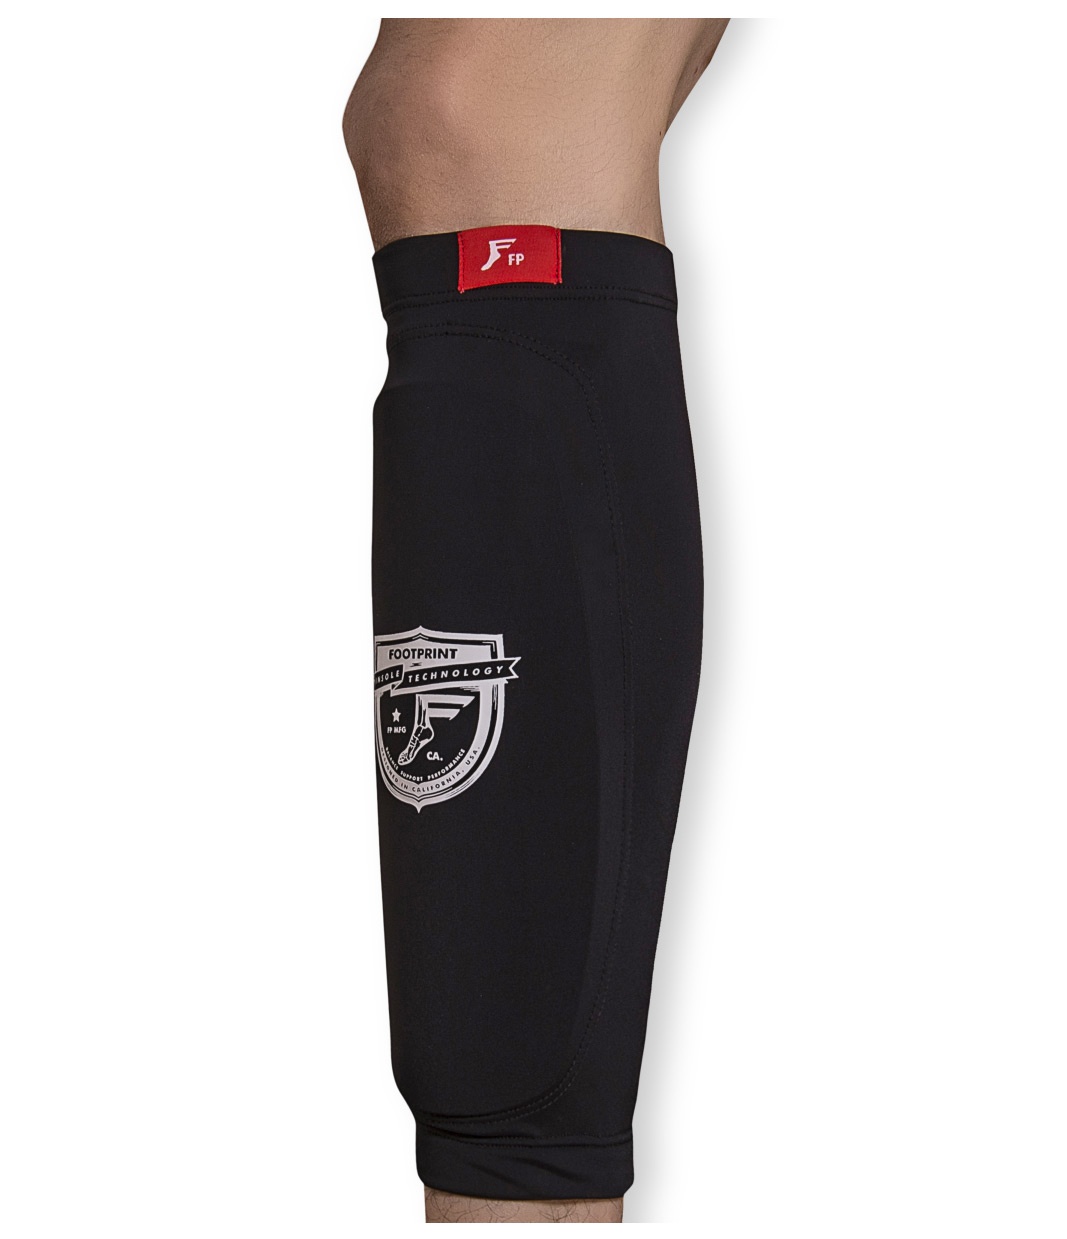 Footprint Painkillers Protective Lo Pro Shin Sleeves